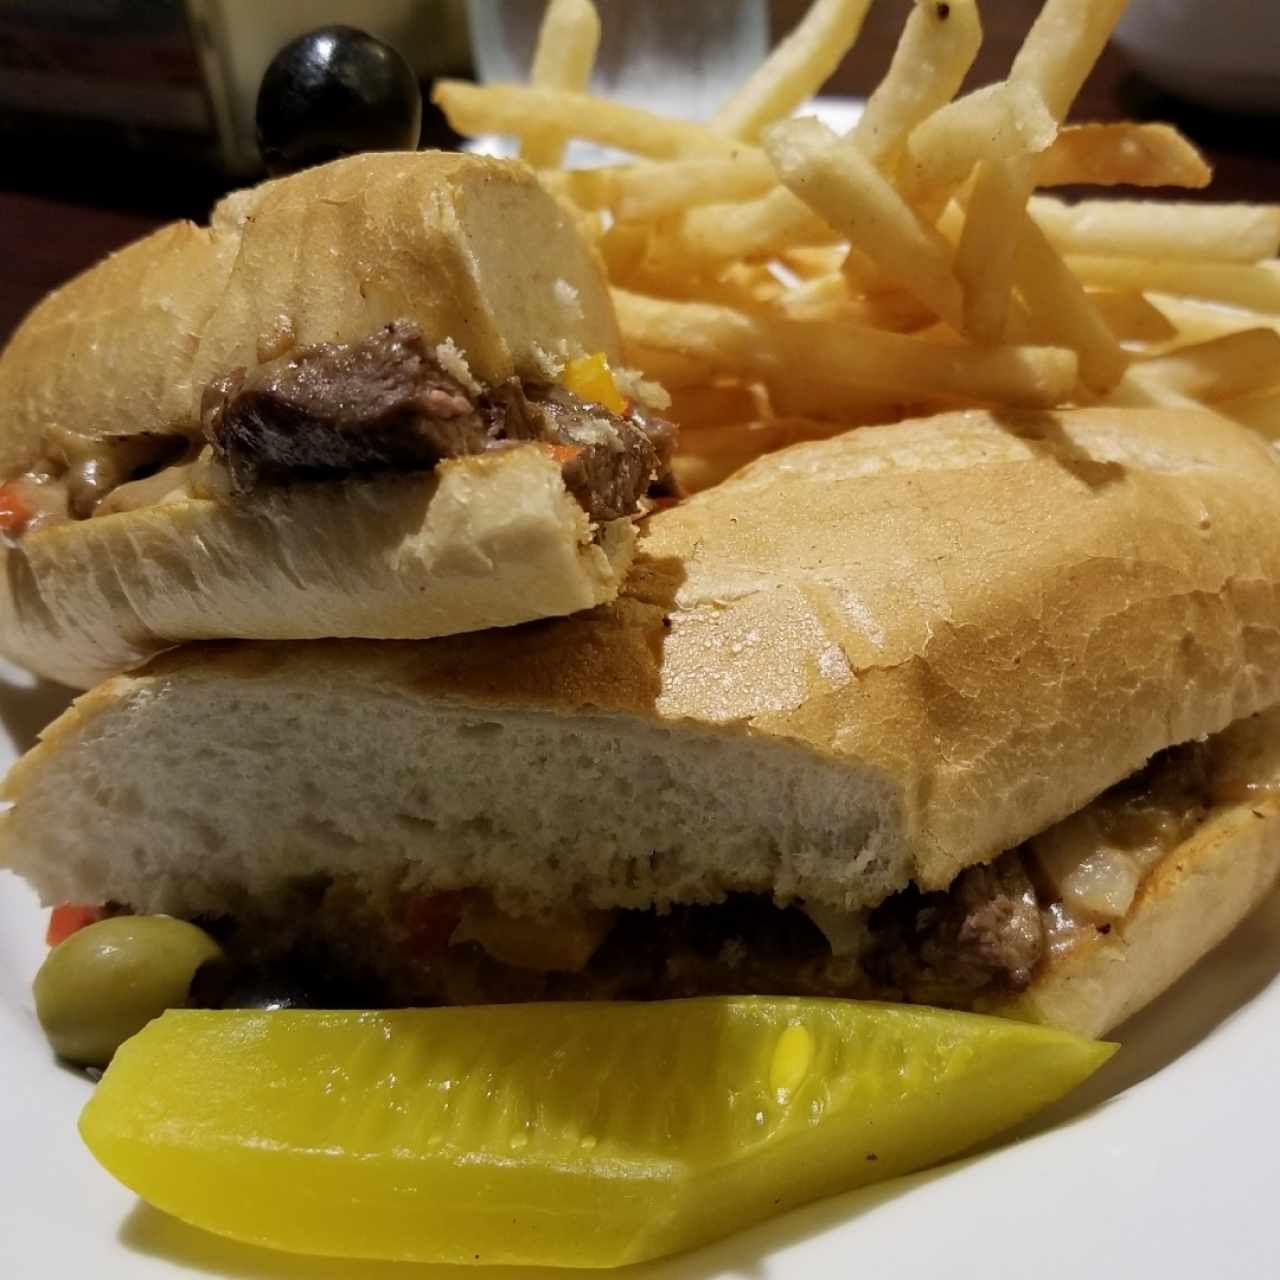 Philly cheese steak 